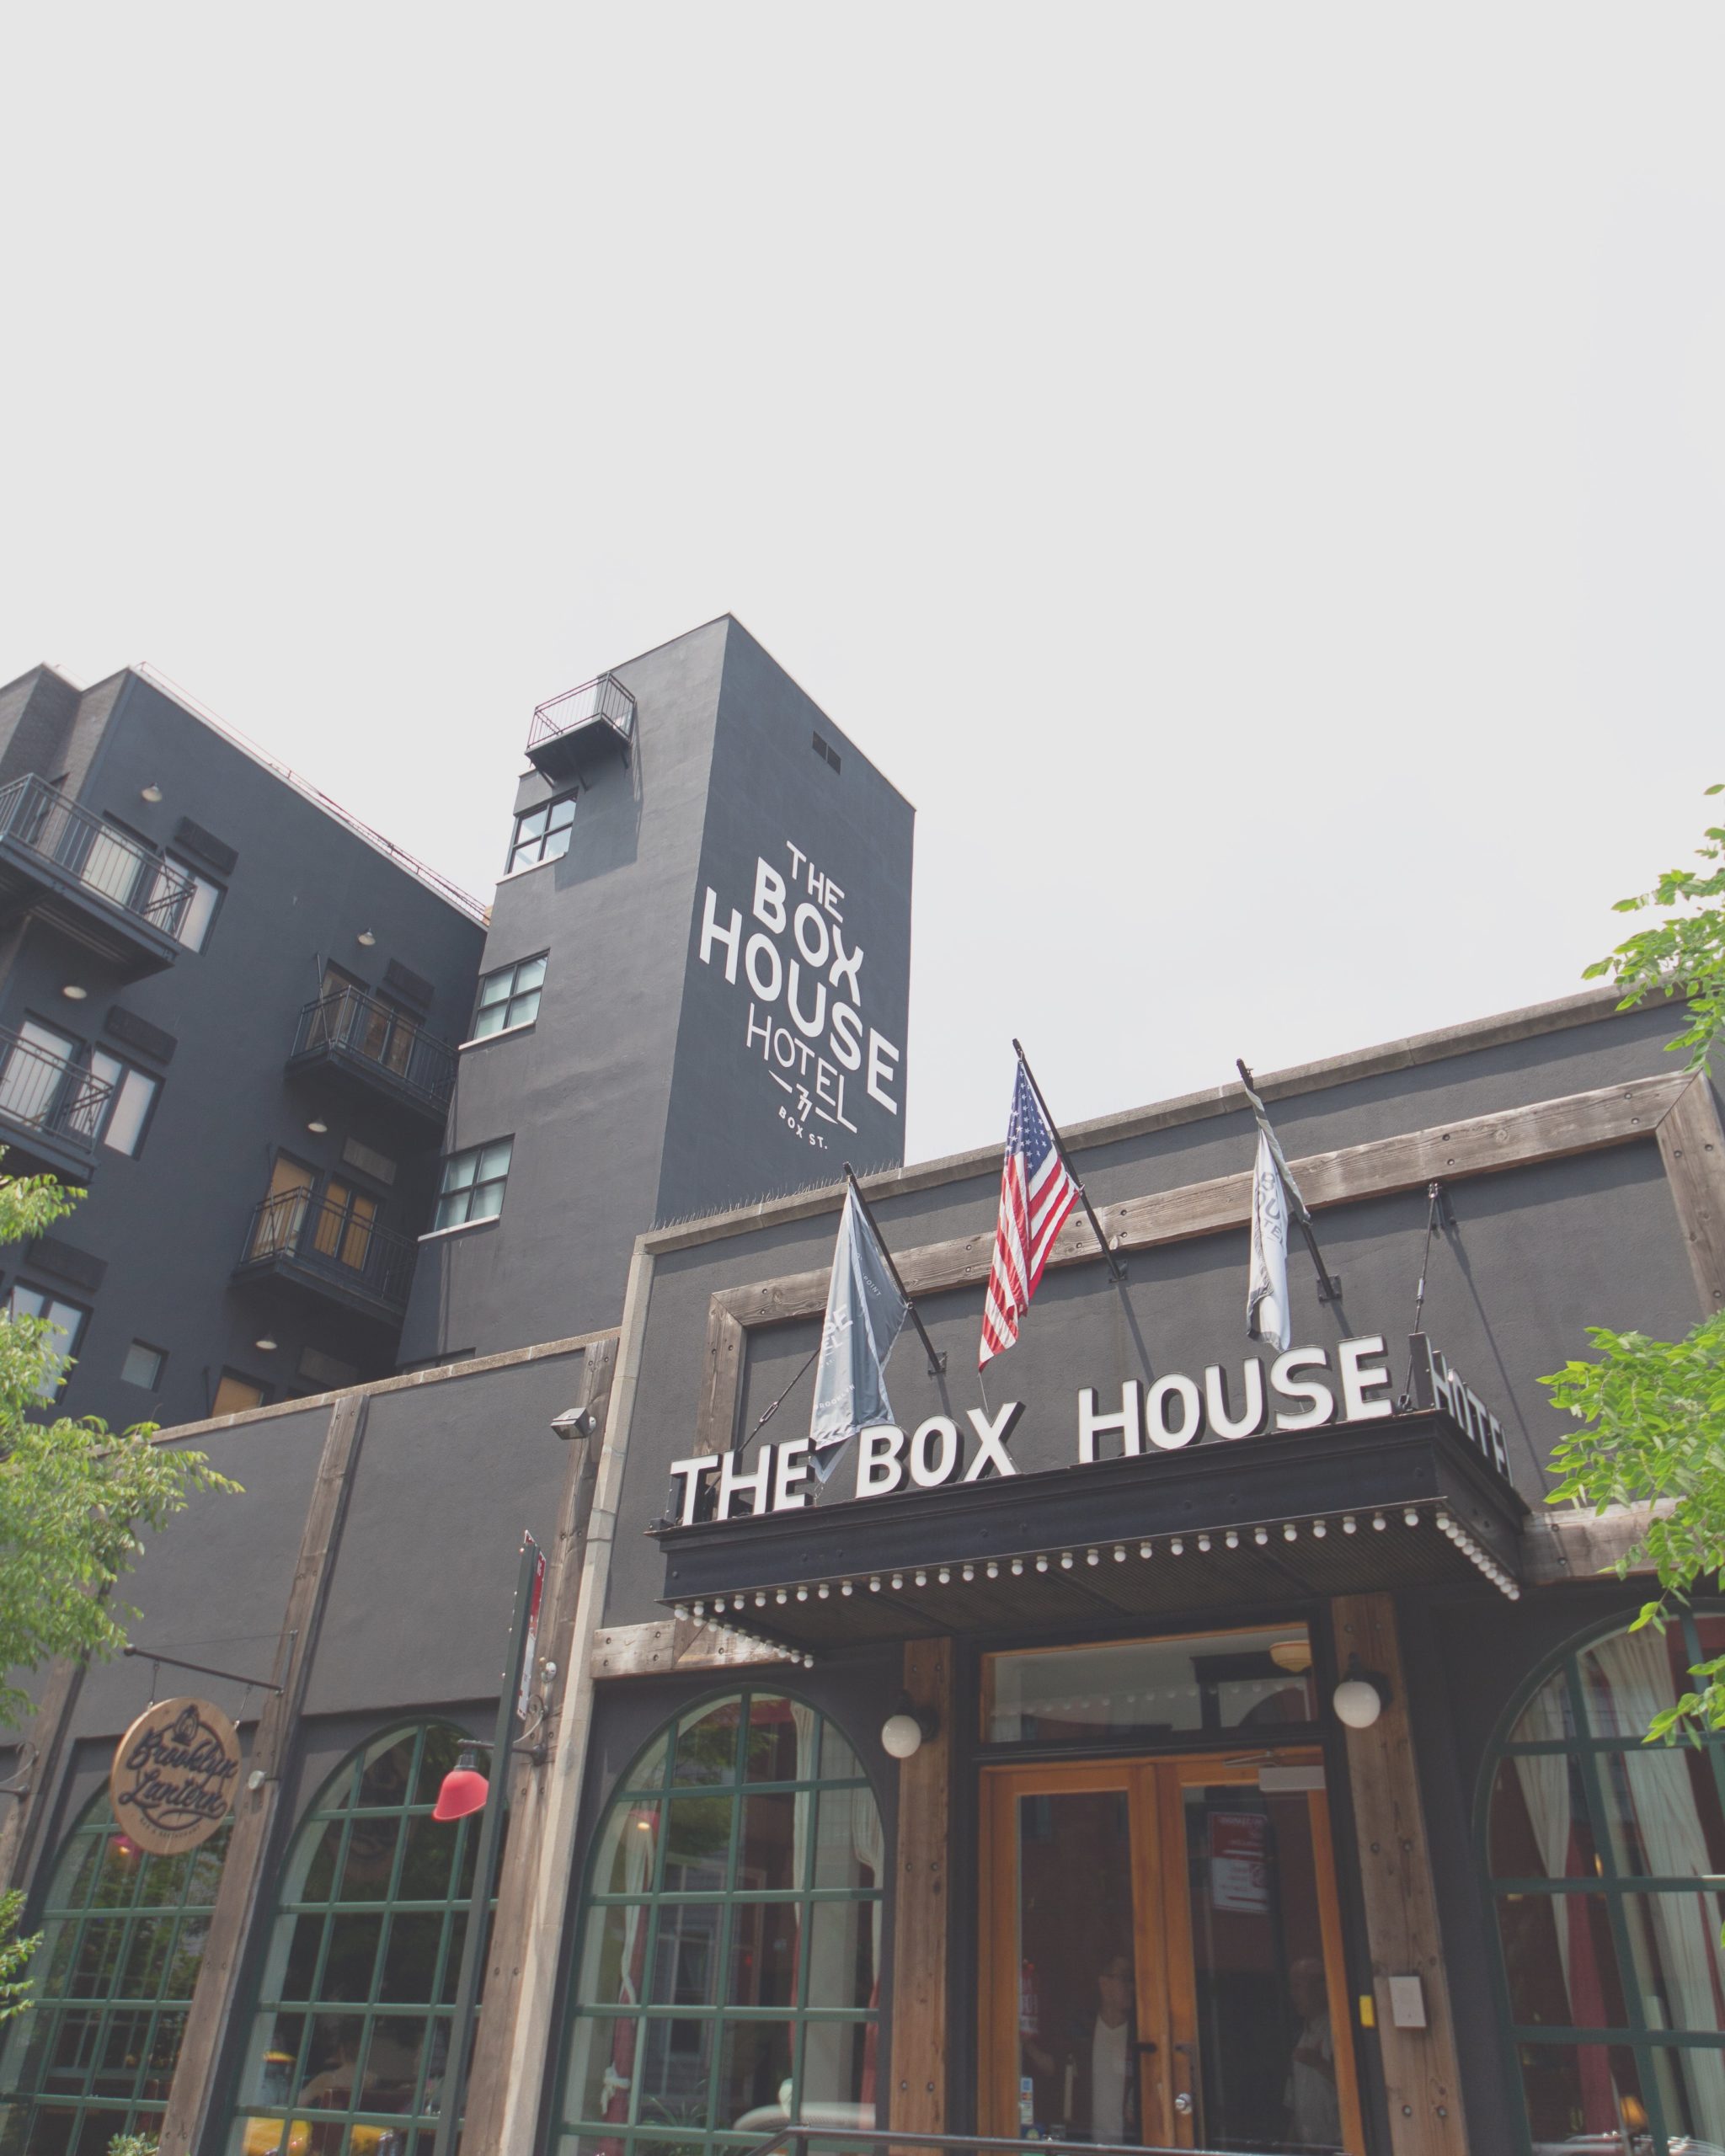 The Box House Hotel